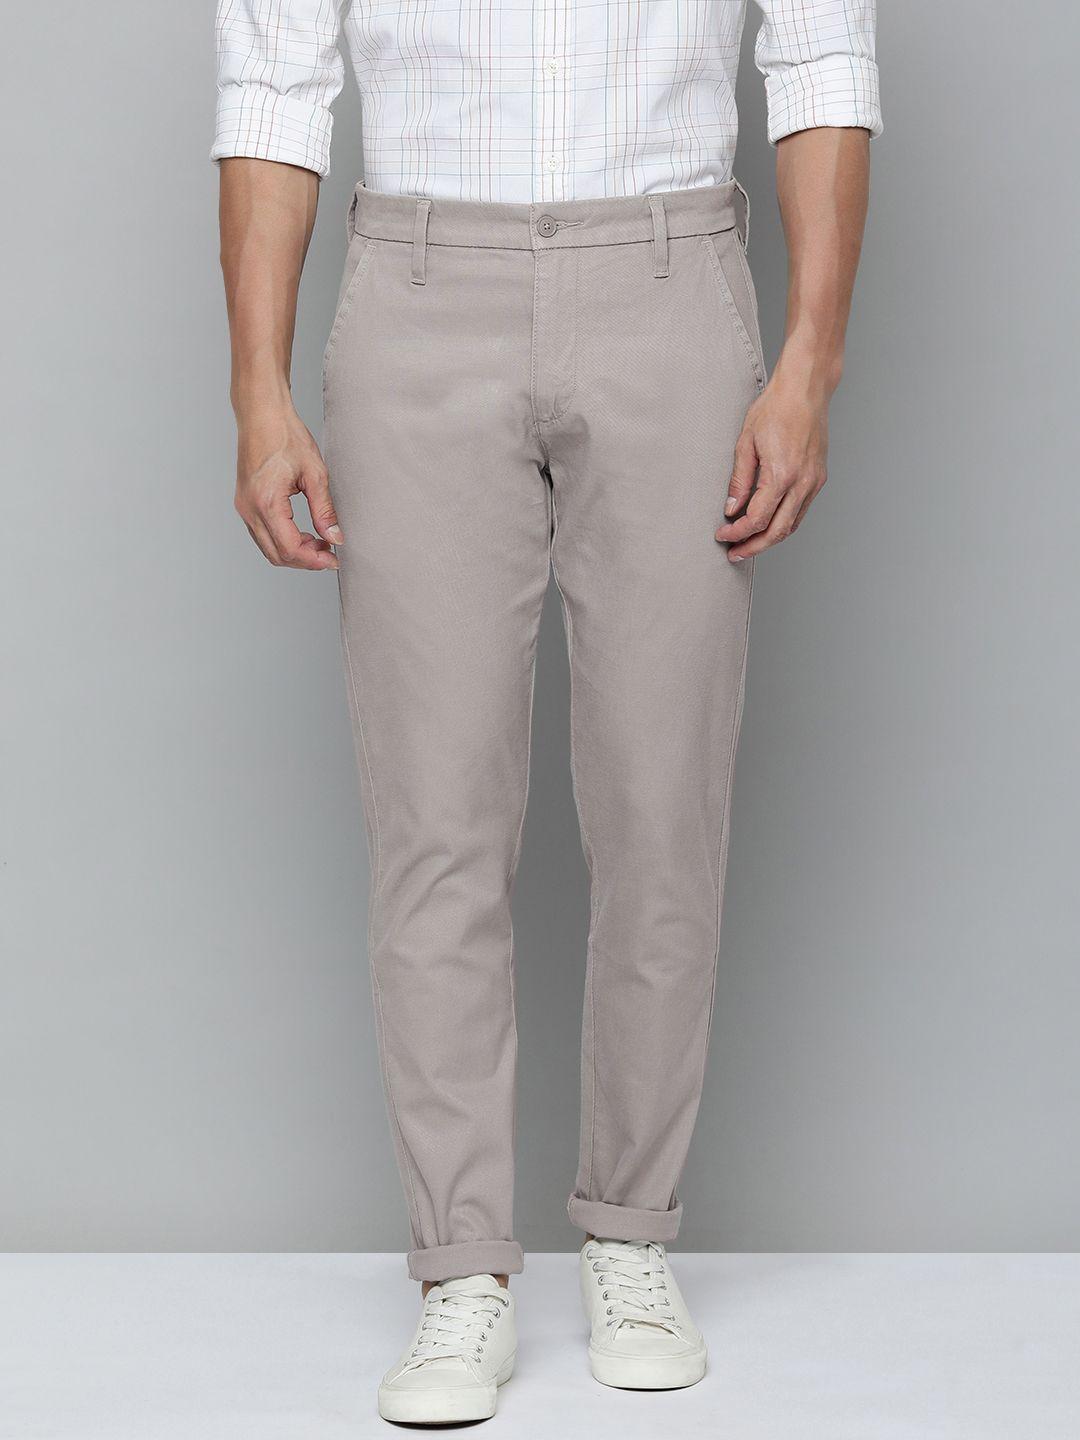 levis-men-tapered-fit-low-rise-smart-casual-chinos